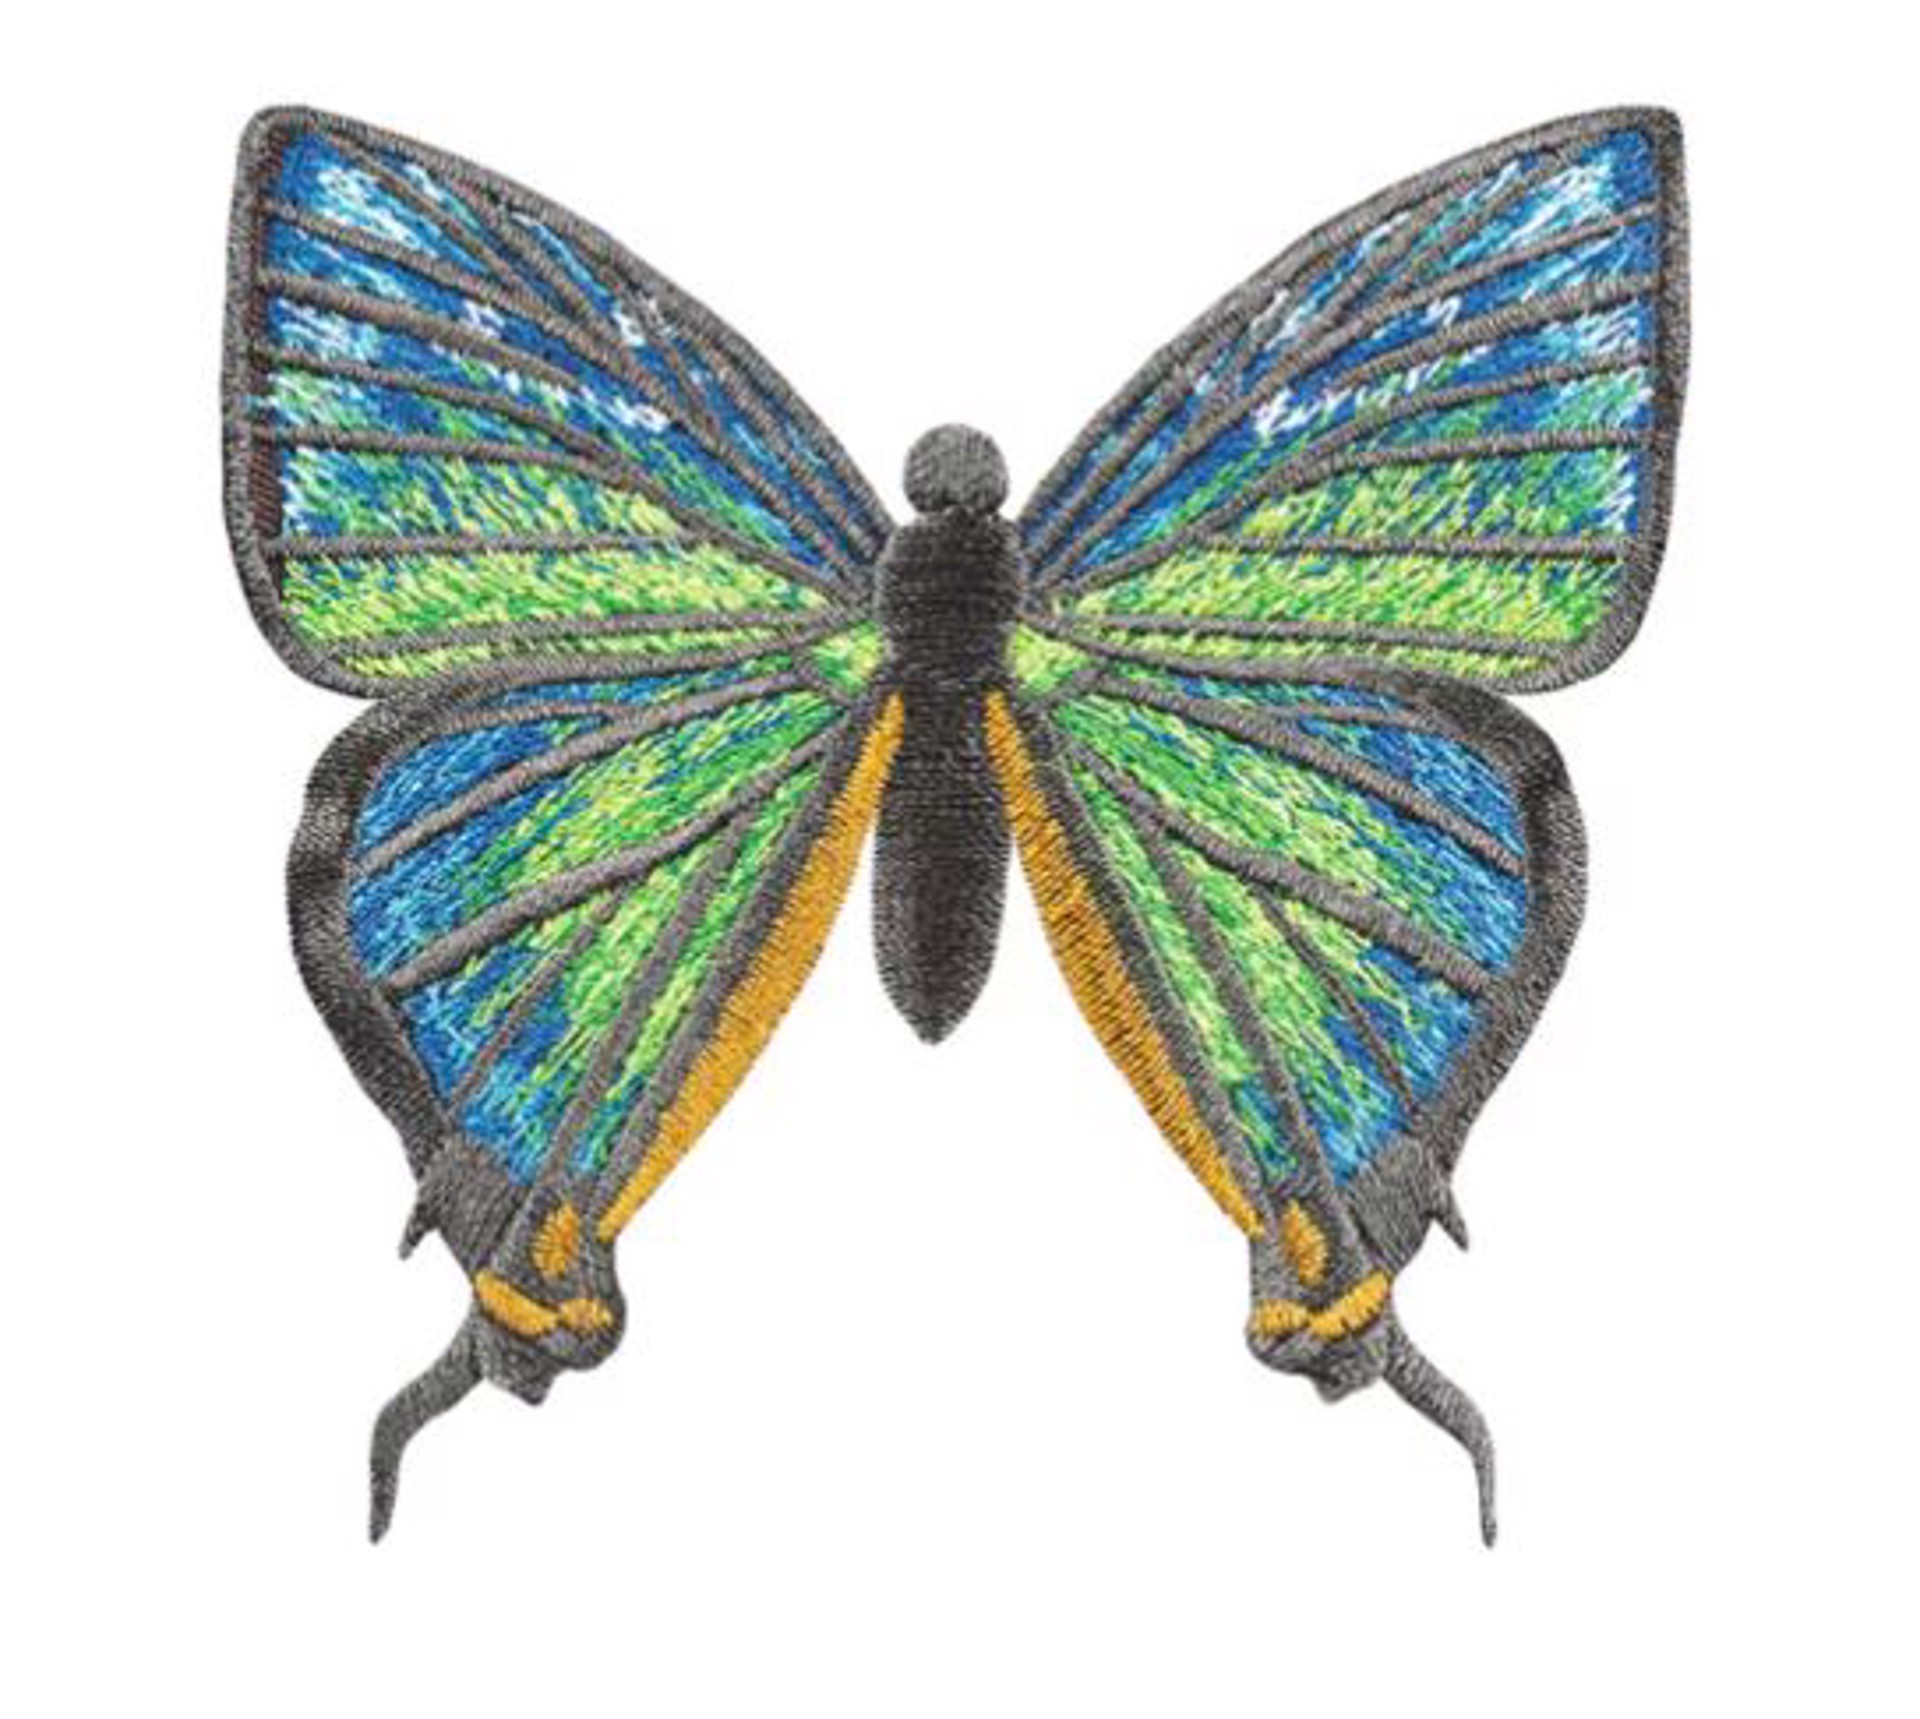 Thecla Hyas Butterfly 4" by Stephen Wilson